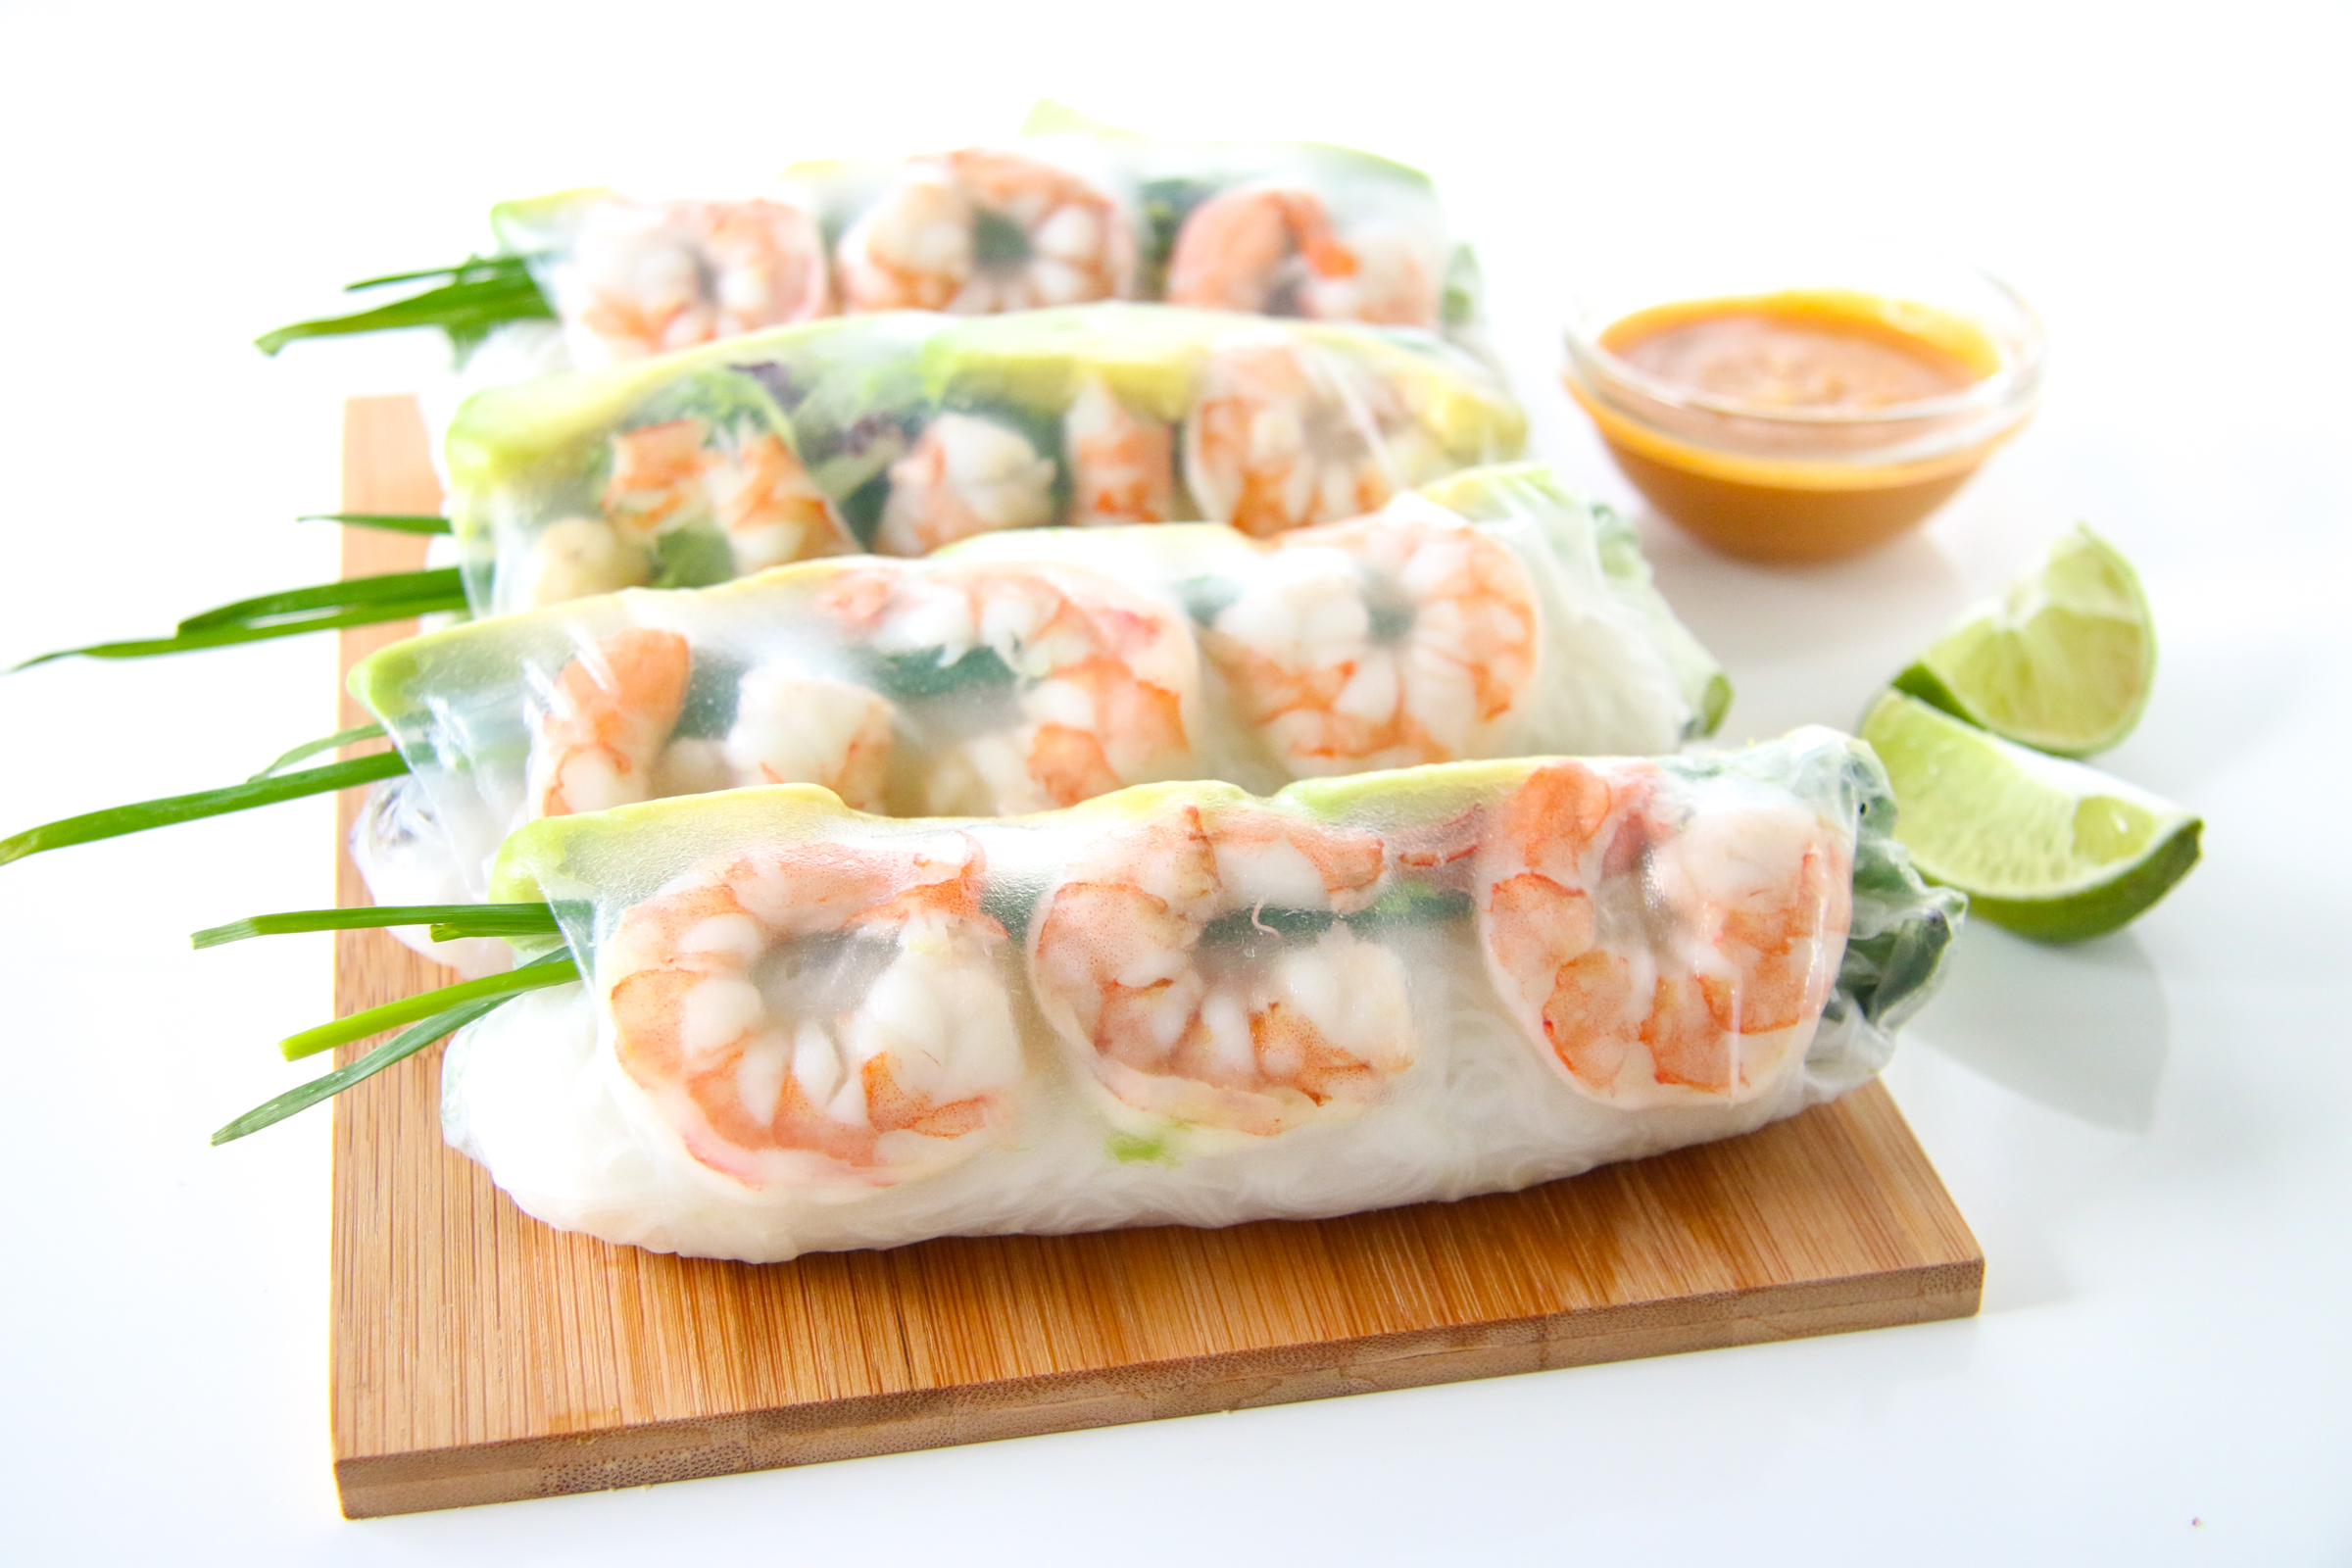 Vietnamese rice paper rolls- How to make (real simple steps